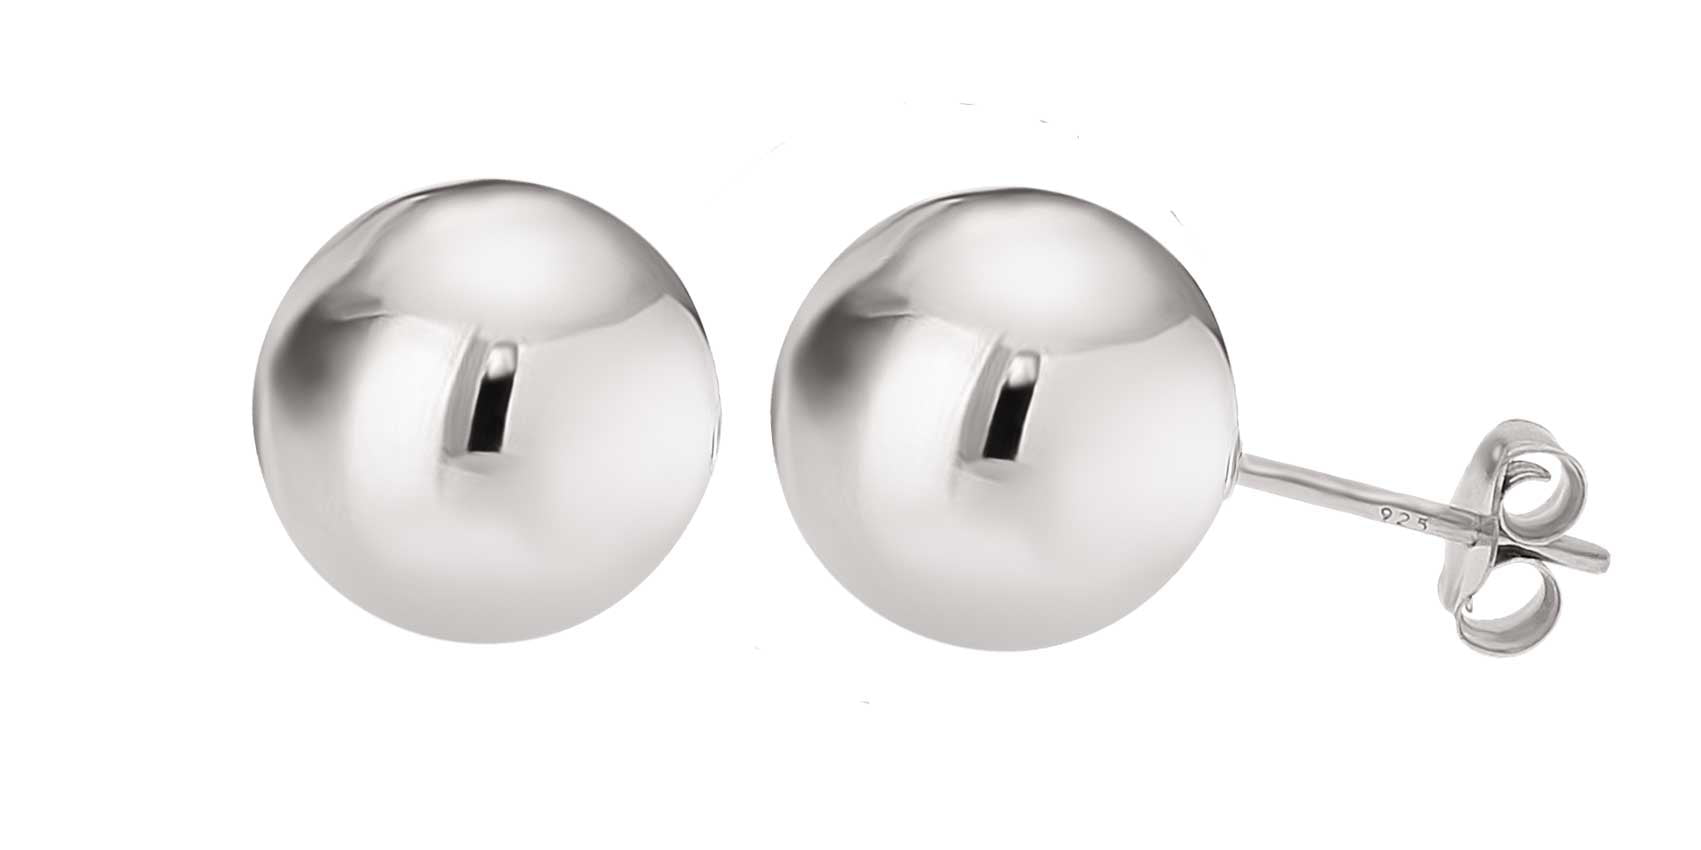 Ball Stud Earrings Silver Sterling Polished Round Ball 12mm Hypoallergenic